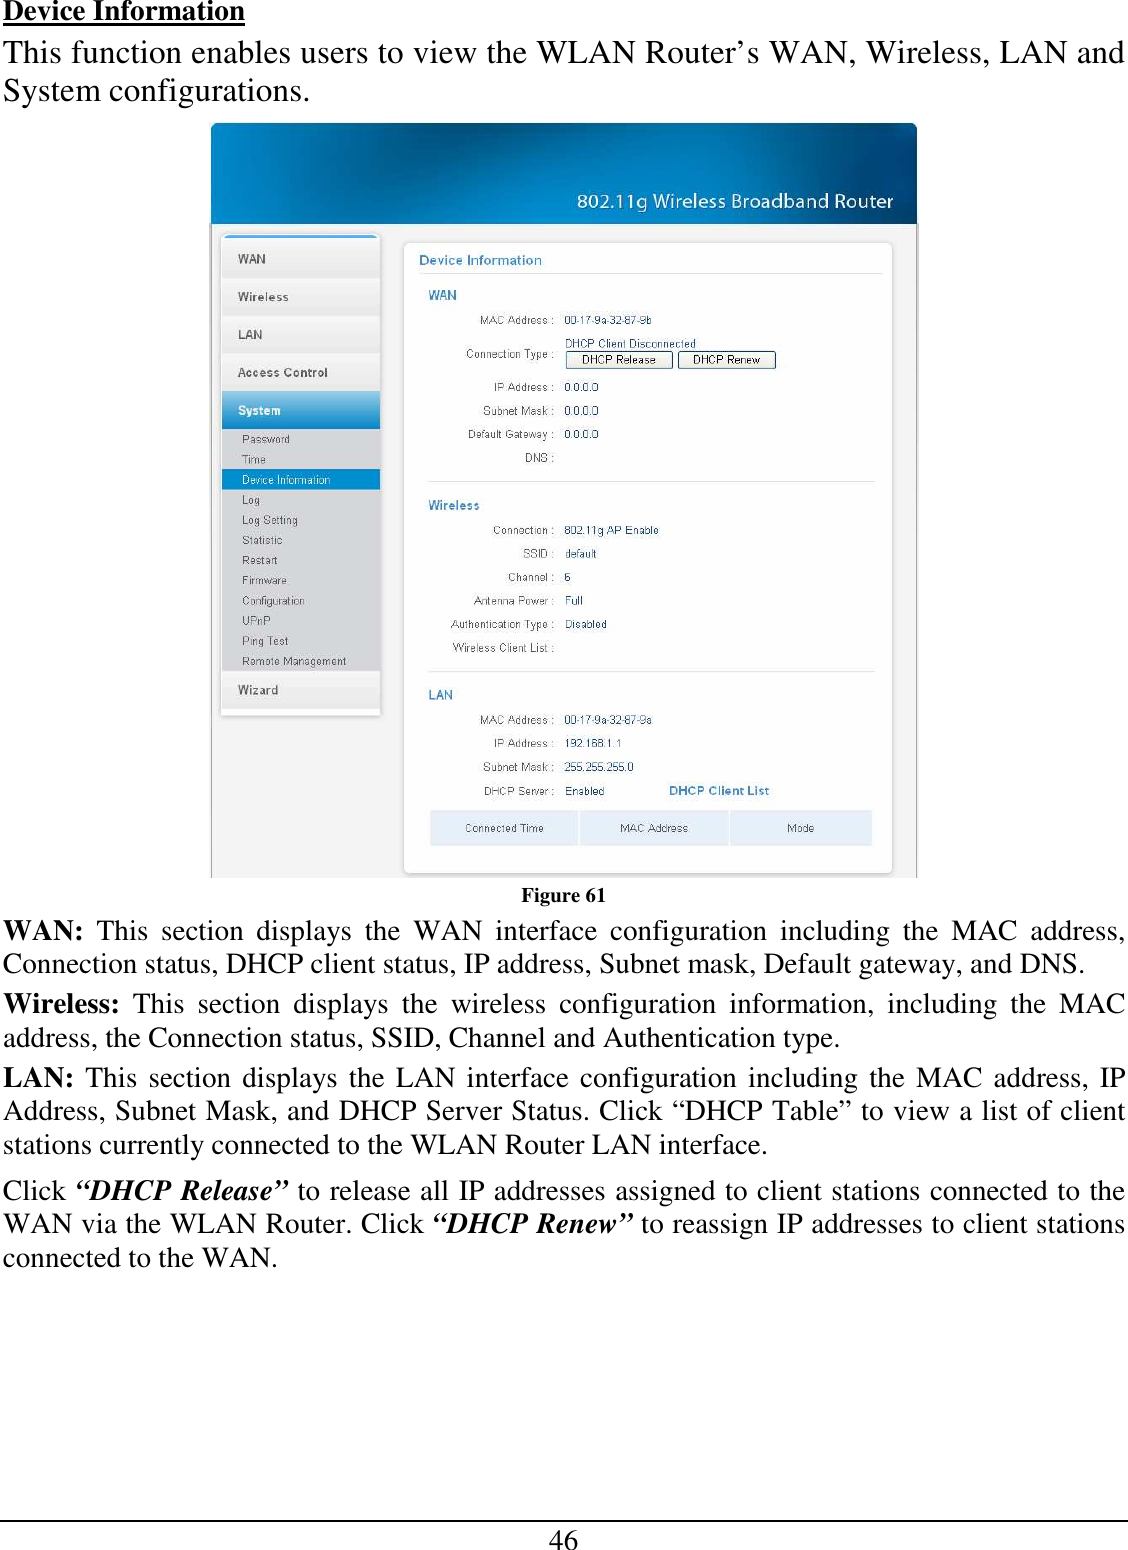 46 Device Information This function enables users to view the WLAN Router’s WAN, Wireless, LAN and System configurations.  Figure 61 WAN:  This  section  displays  the  WAN  interface  configuration  including  the  MAC  address, Connection status, DHCP client status, IP address, Subnet mask, Default gateway, and DNS.  Wireless:  This  section  displays  the  wireless  configuration  information,  including  the  MAC address, the Connection status, SSID, Channel and Authentication type. LAN: This section displays the LAN interface configuration including the MAC address, IP Address, Subnet Mask, and DHCP Server Status. Click “DHCP Table” to view a list of client stations currently connected to the WLAN Router LAN interface. Click “DHCP Release” to release all IP addresses assigned to client stations connected to the WAN via the WLAN Router. Click “DHCP Renew” to reassign IP addresses to client stations connected to the WAN. 